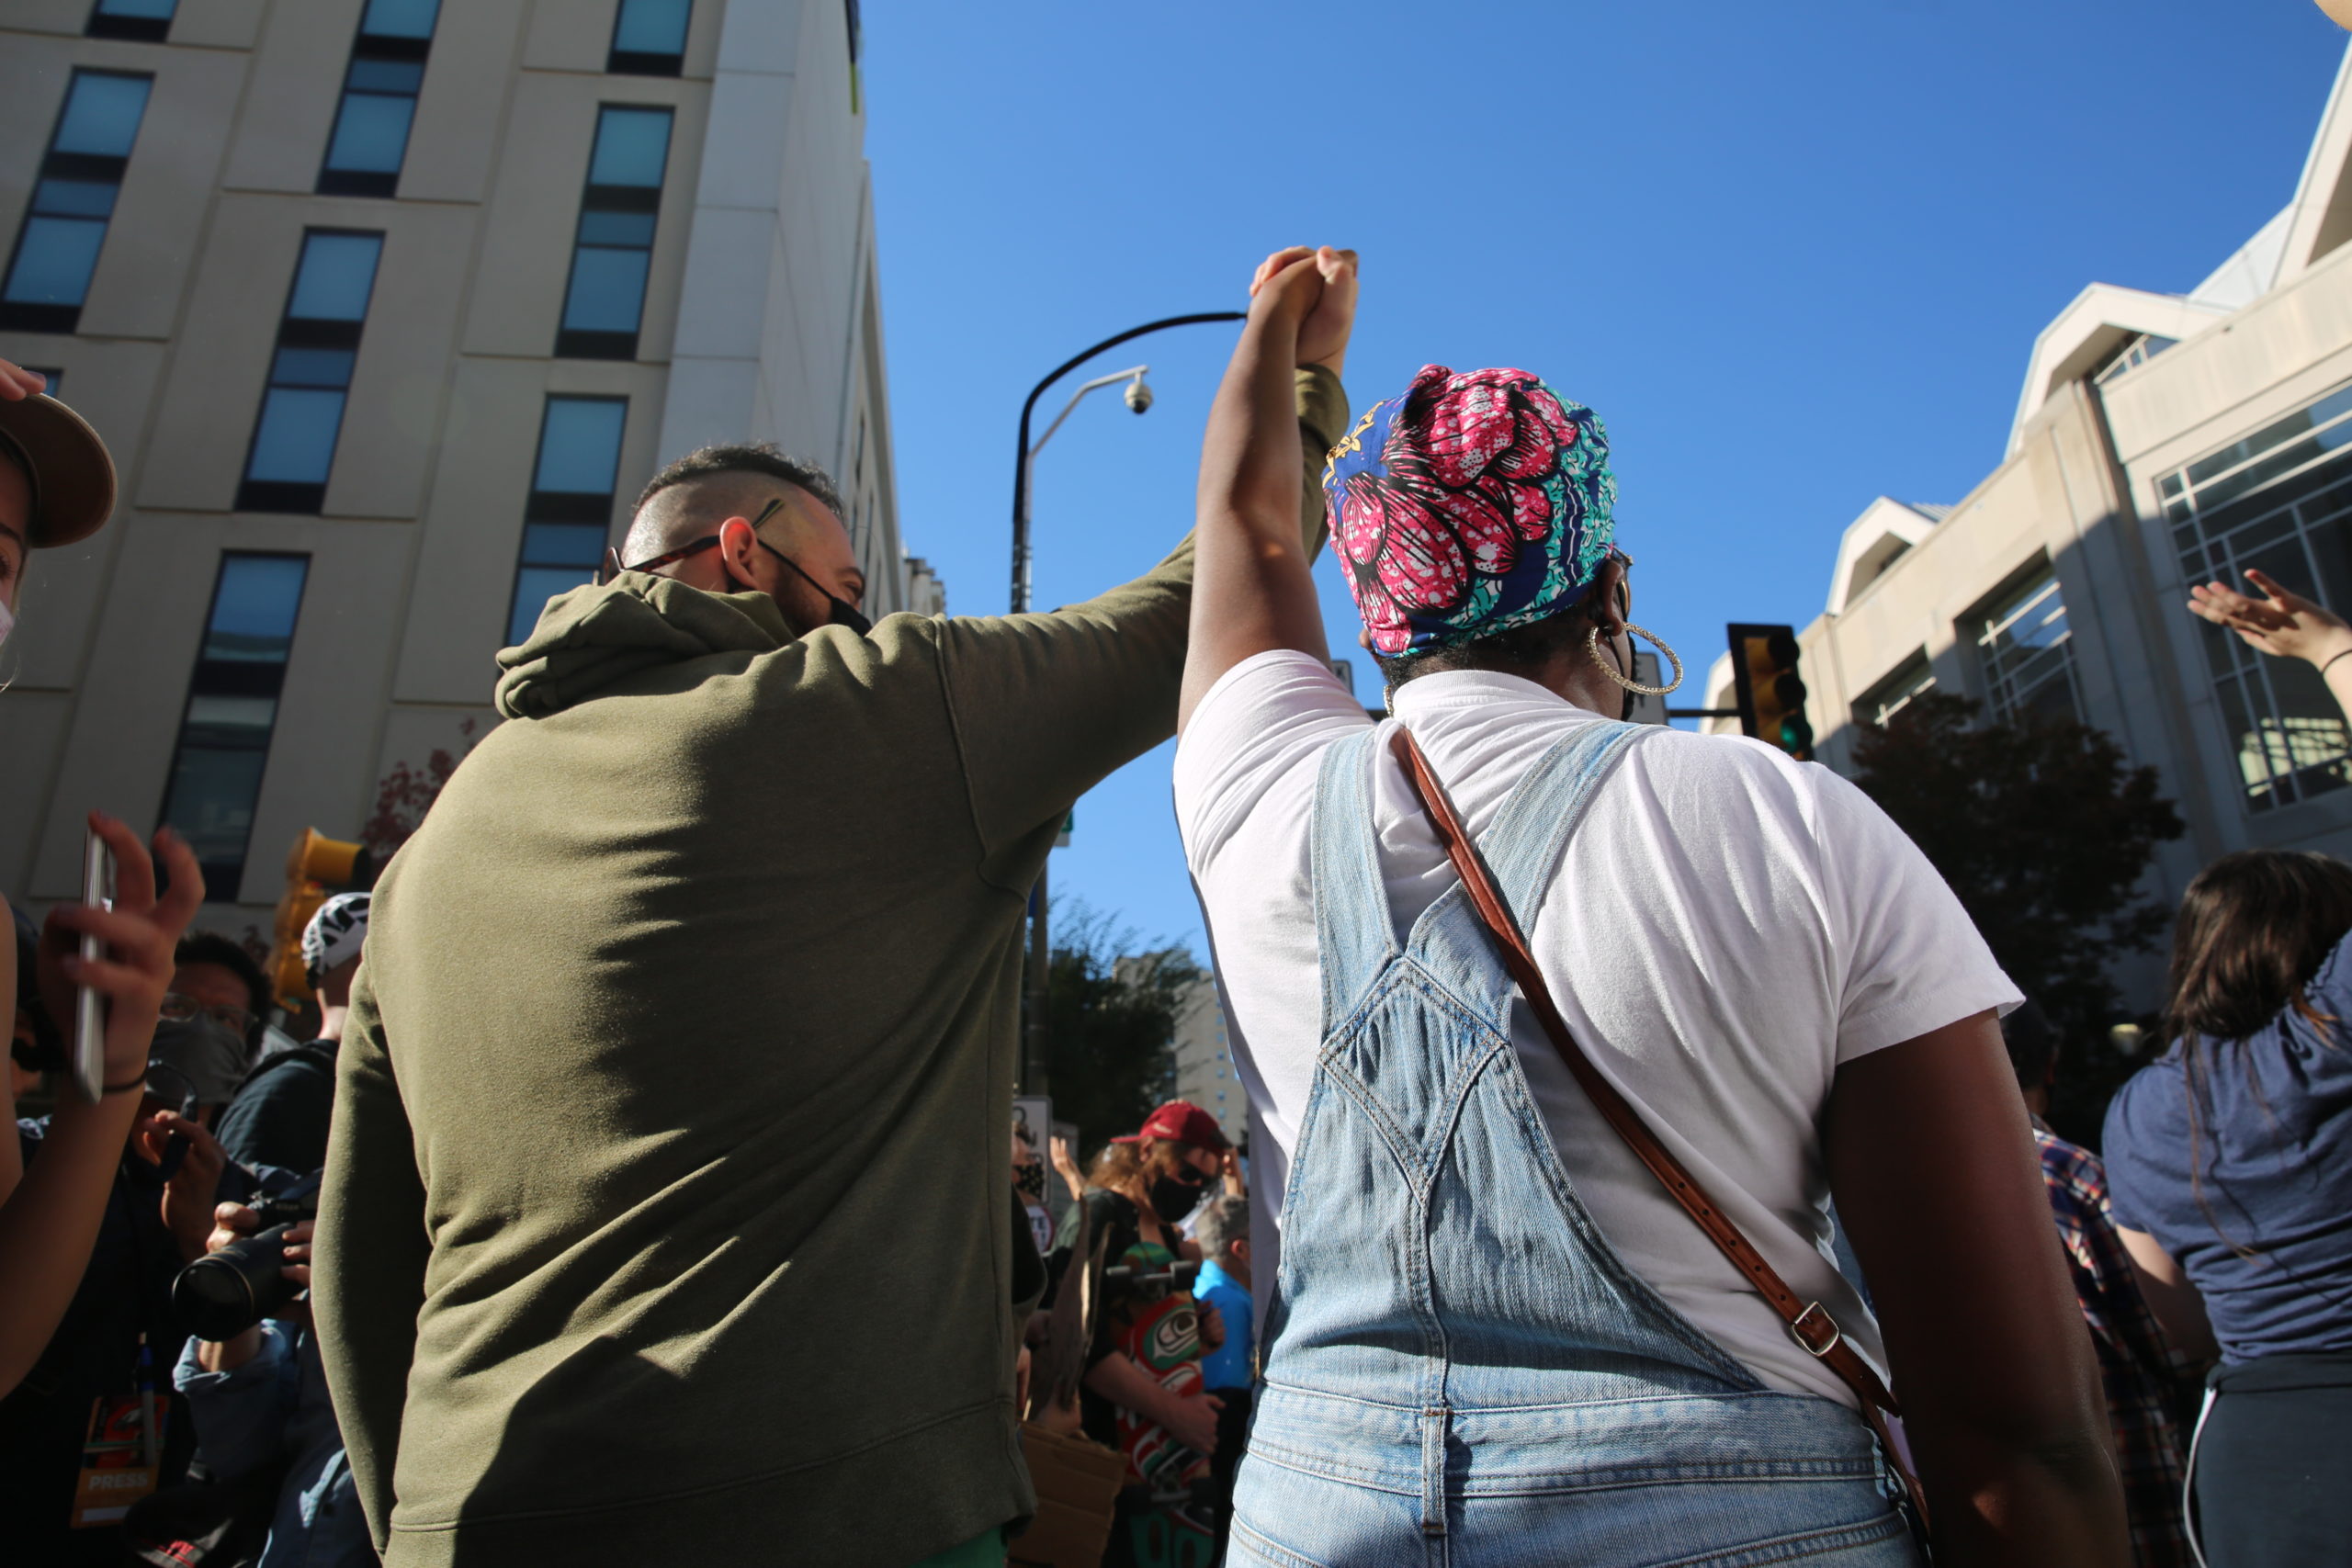 A man and woman stand in a crowd with their arms raised